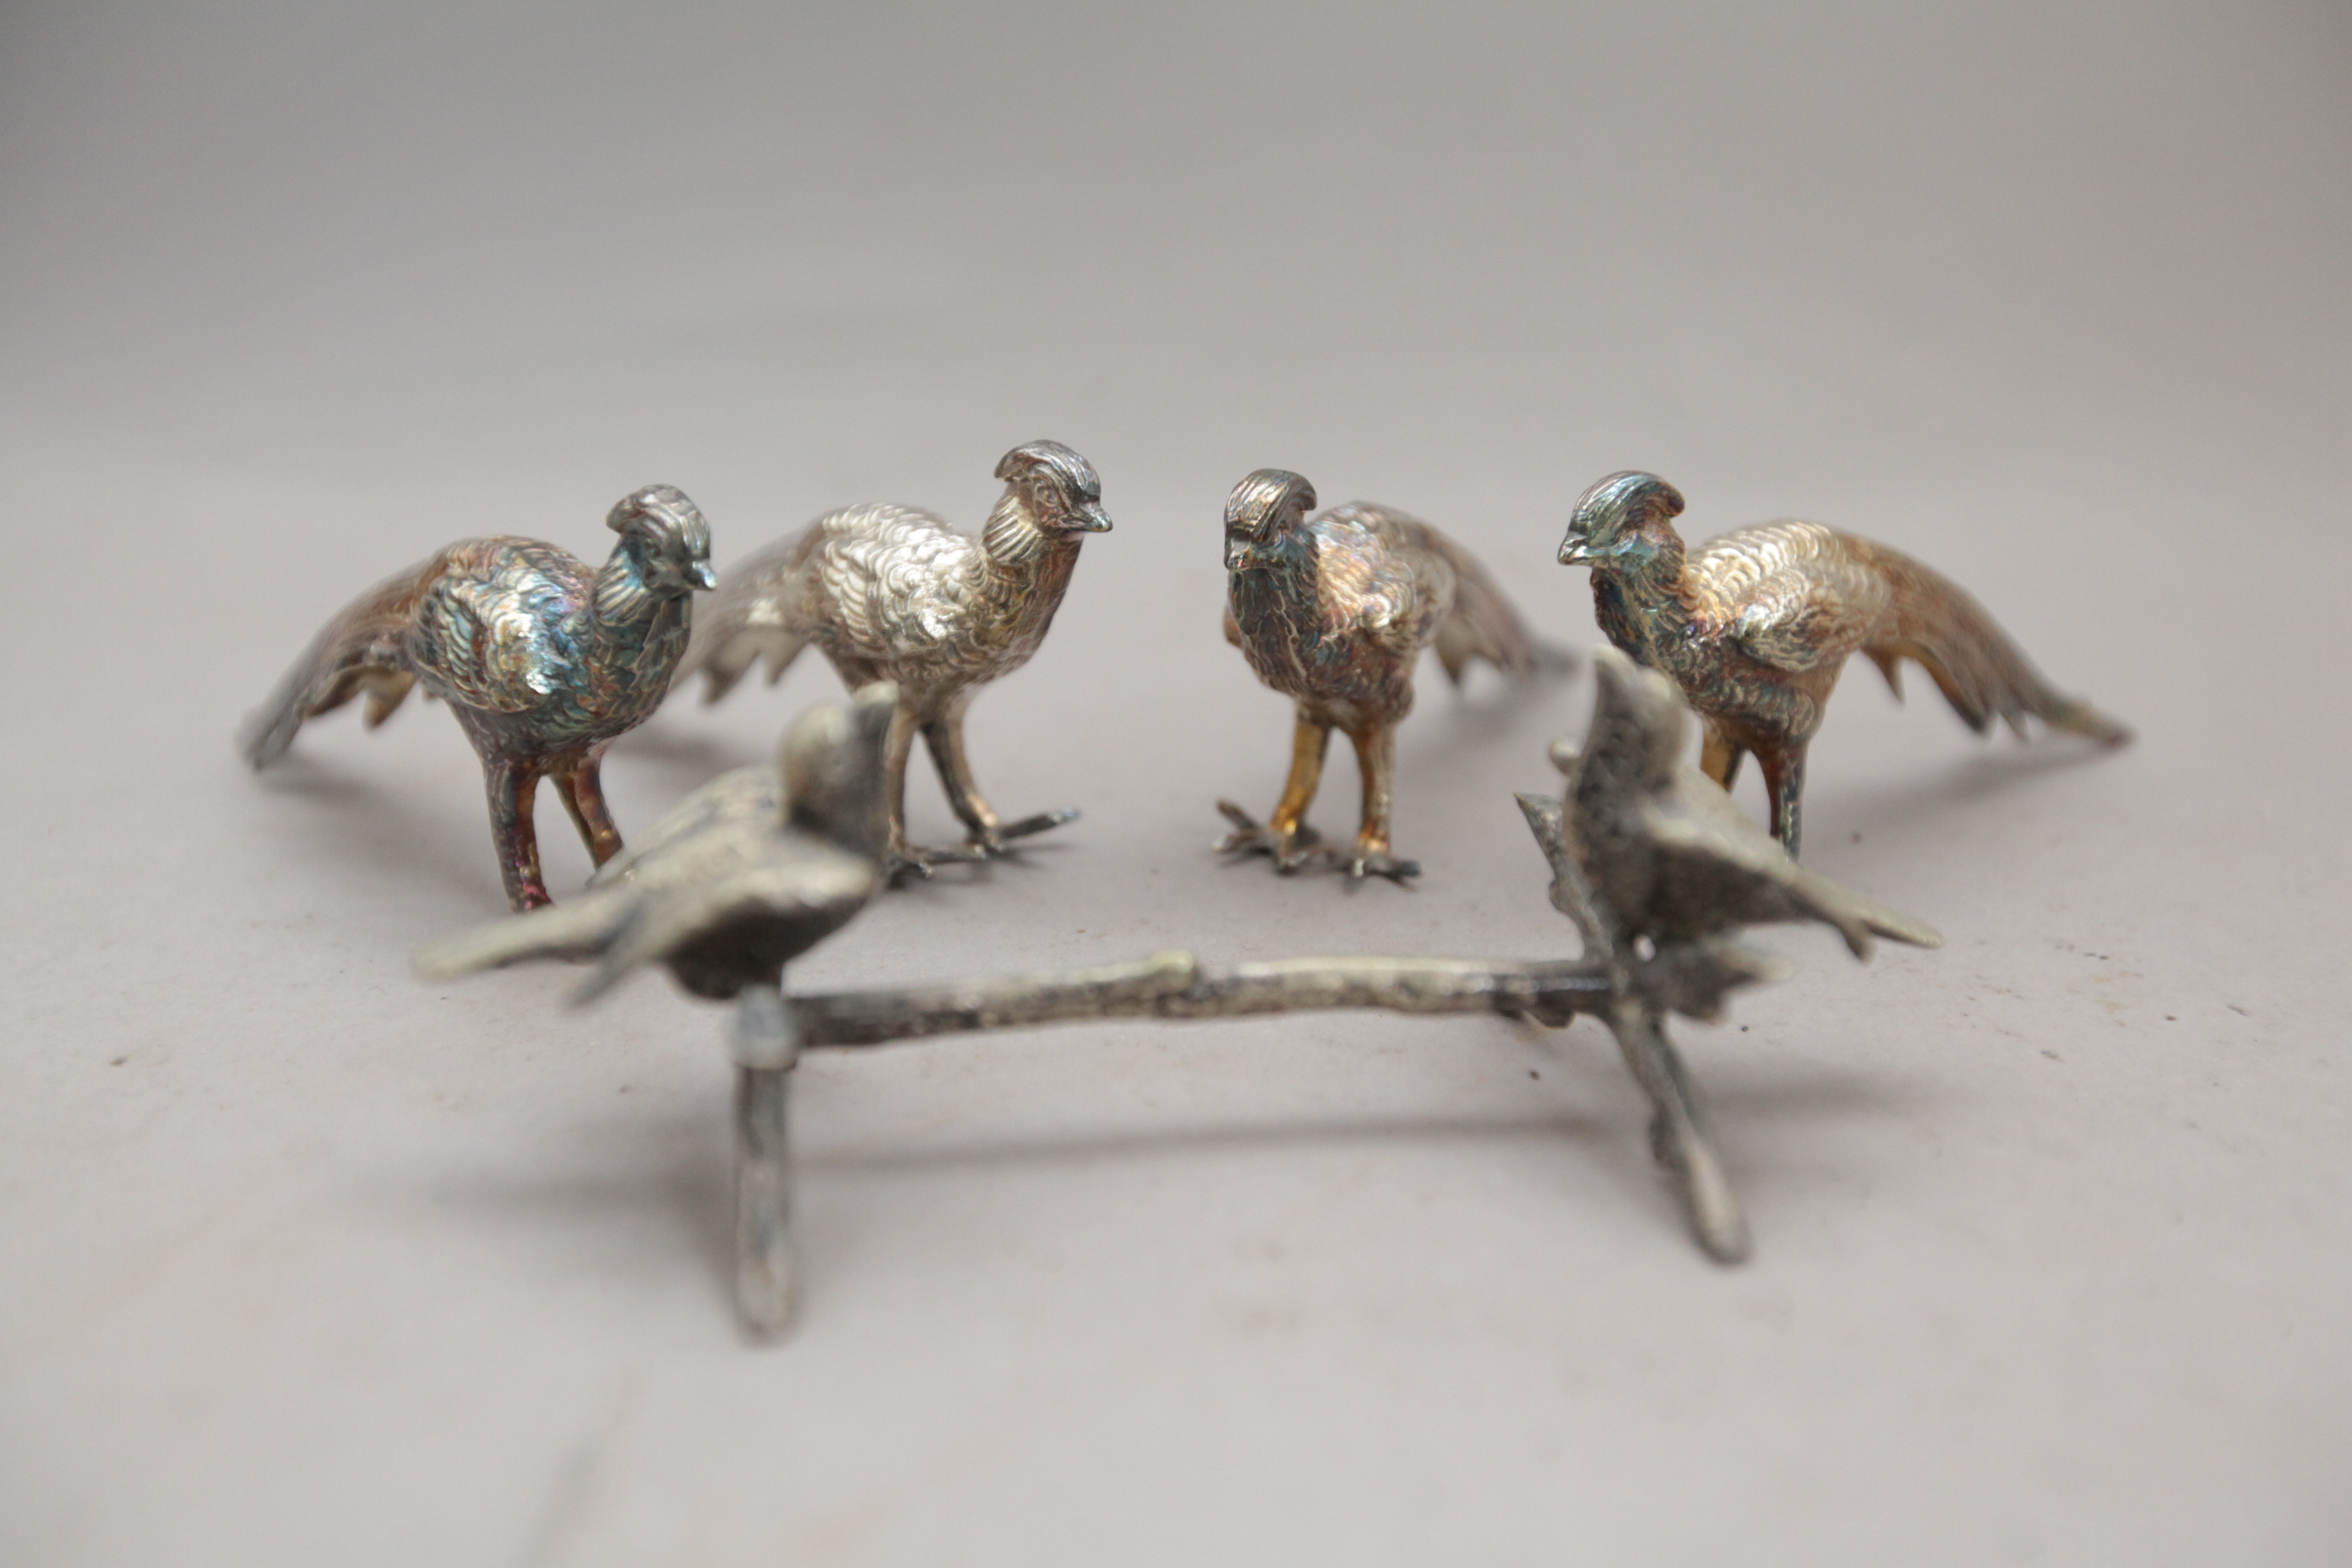 Plated Flatware & Cutlery and Four Small Table Pheasants (lot) - Image 4 of 4